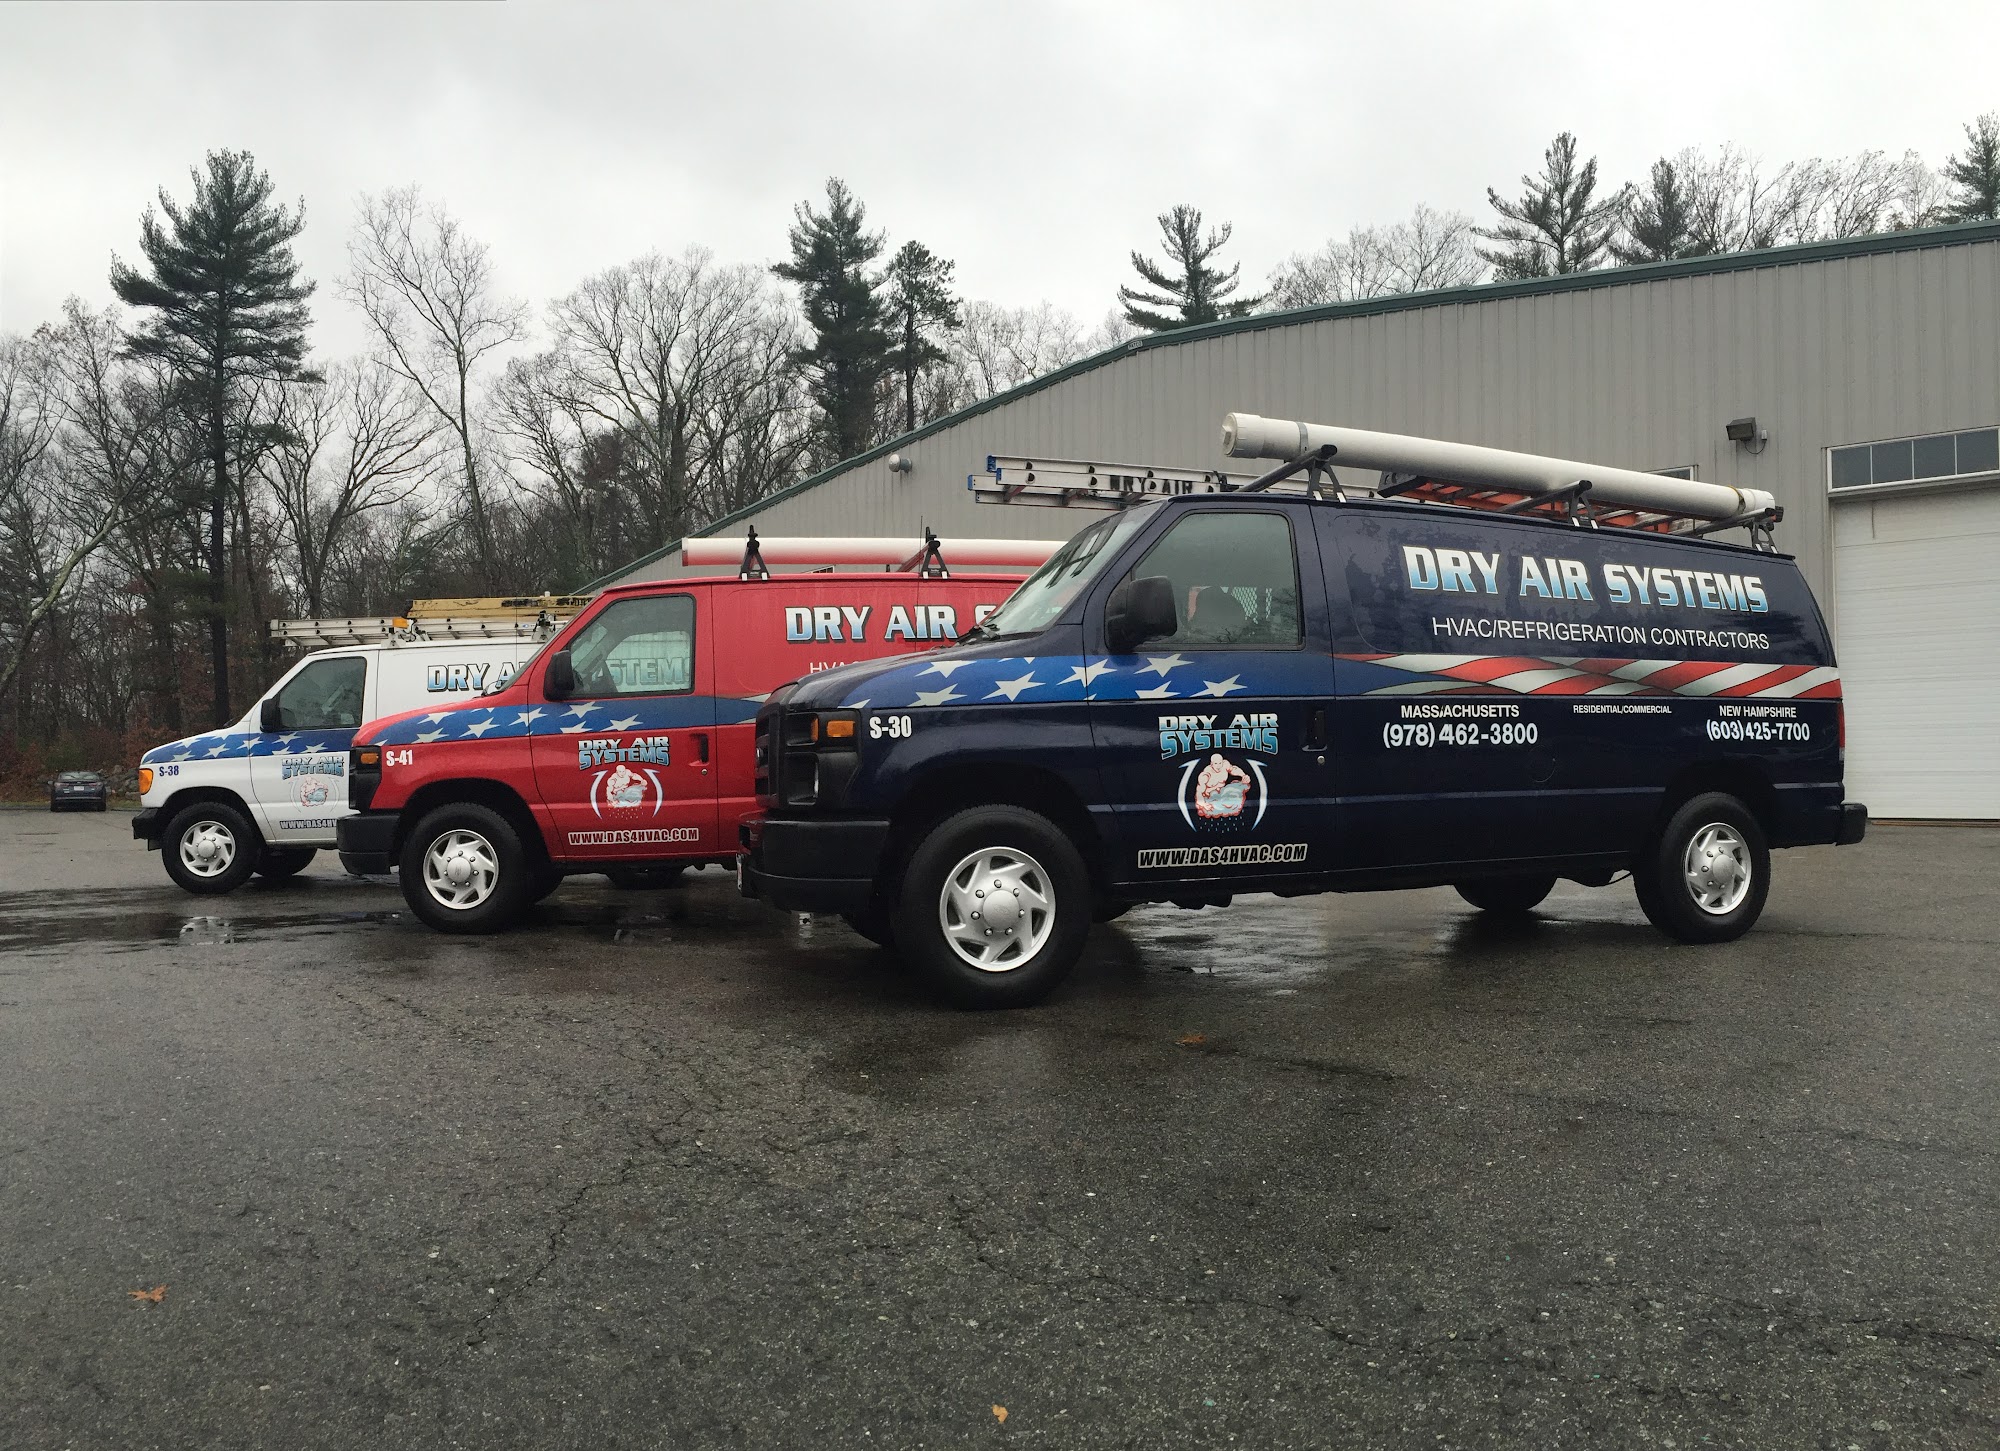 Dry Air Systems Inc, HVAC Contractors in Mass, NH & Maine